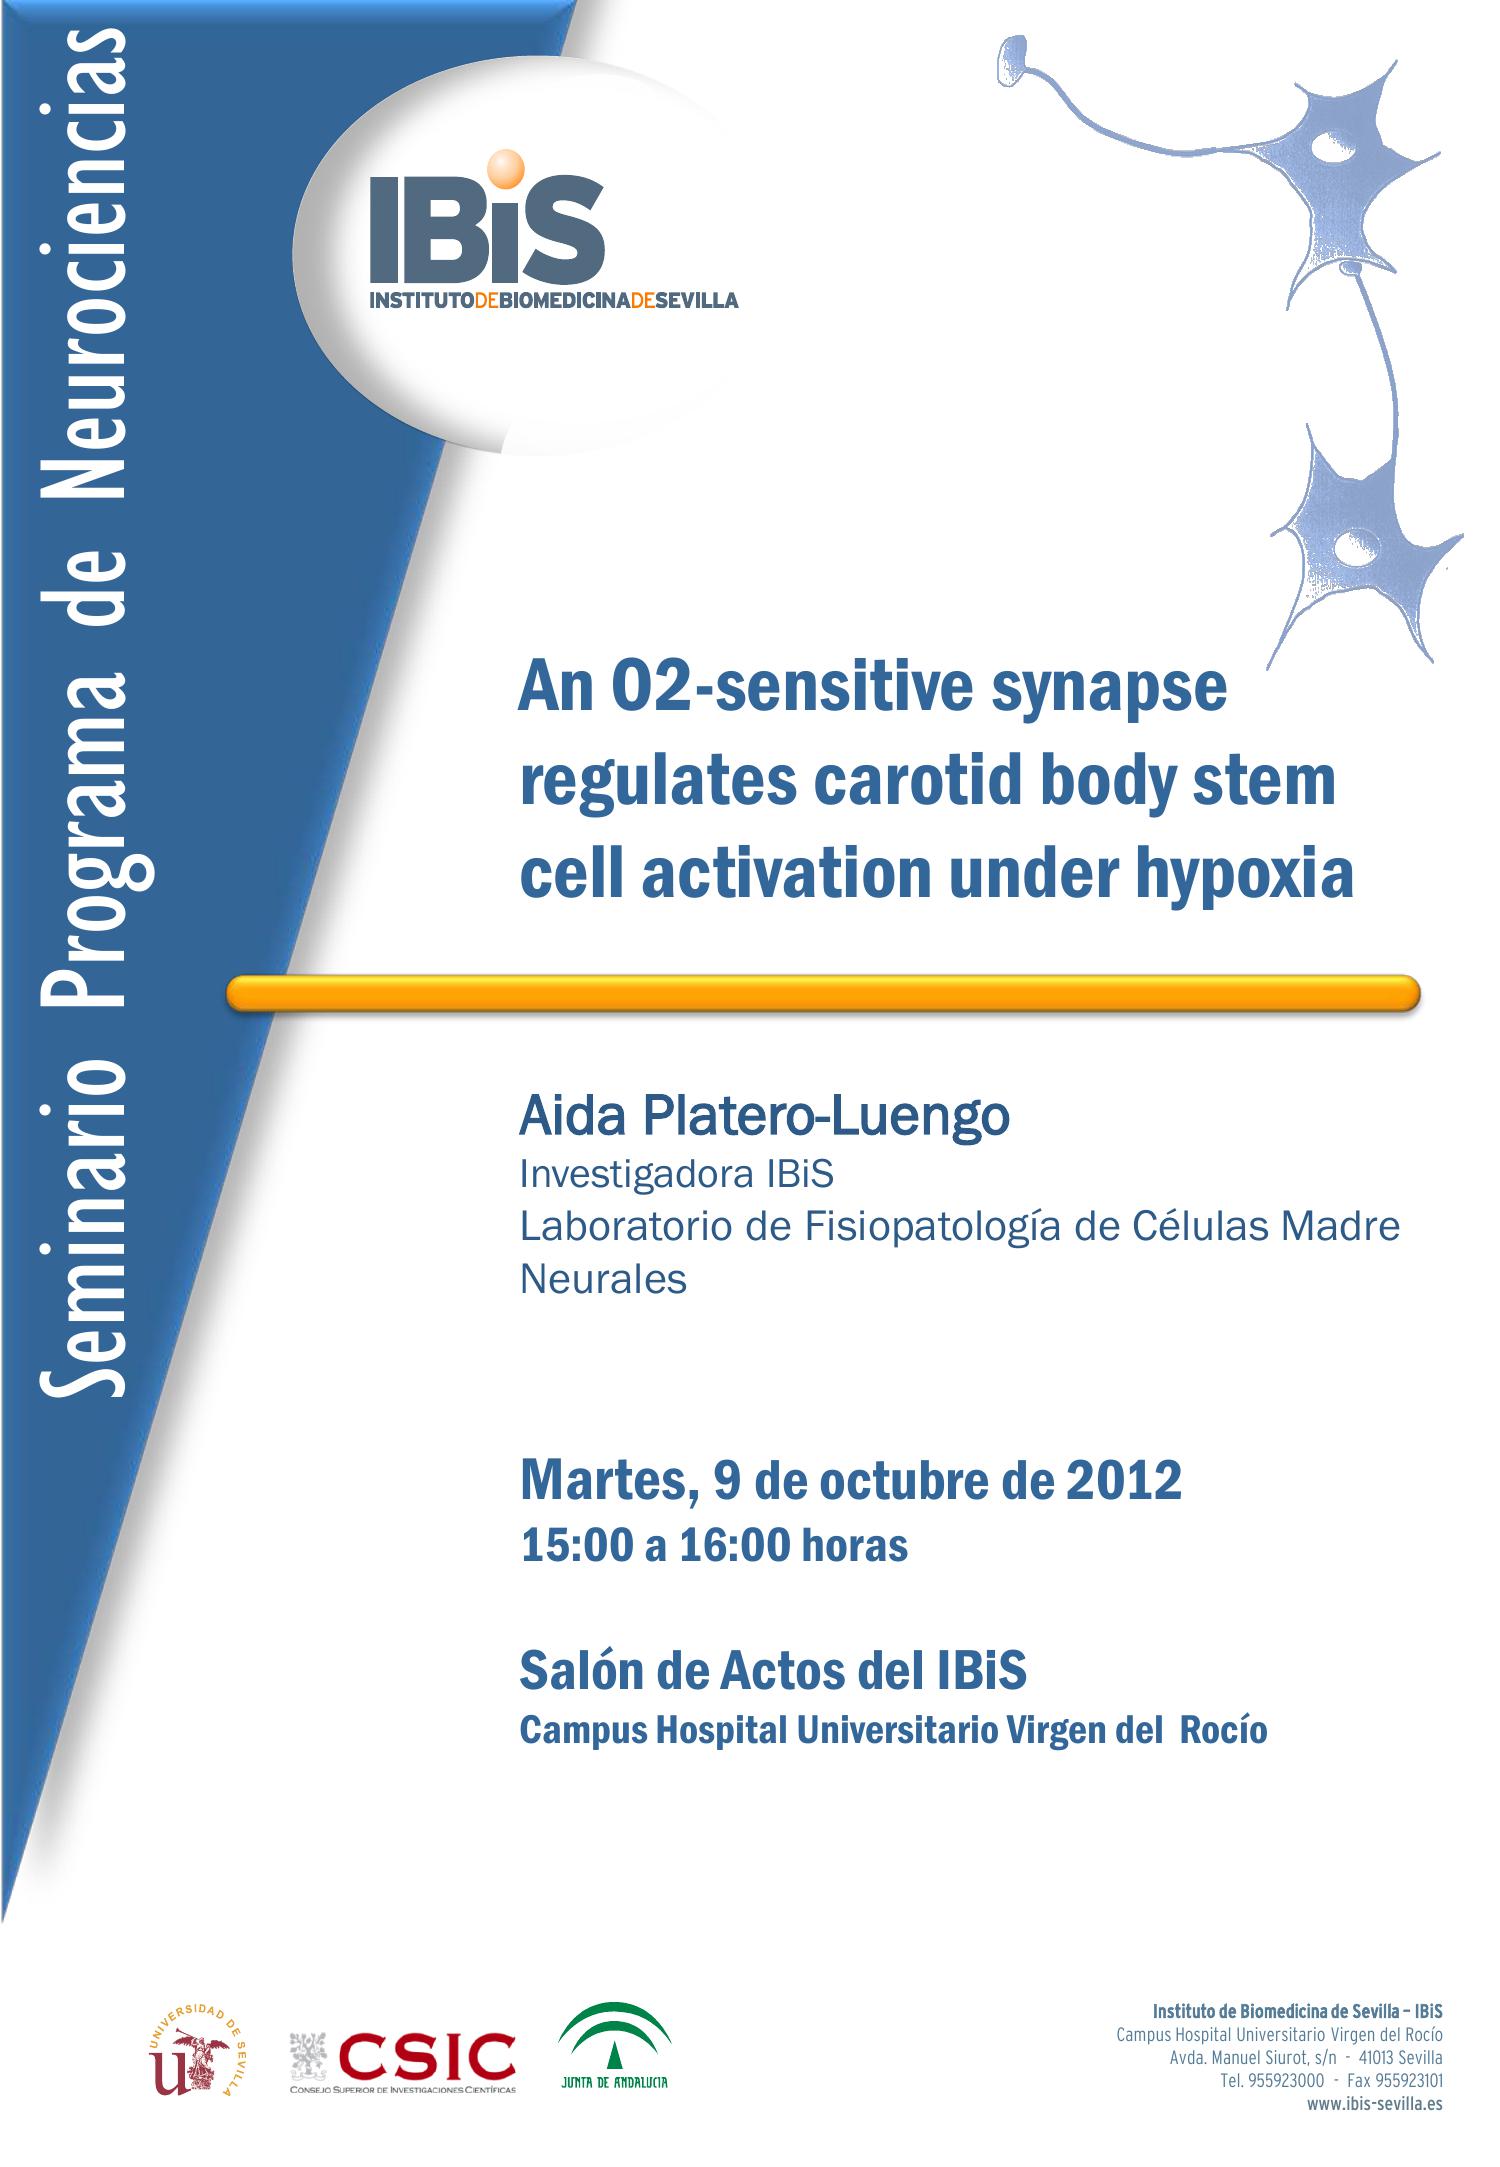 Poster: An O2-sensitive synapse regulates carotid body stem cell activation under hypoxia.